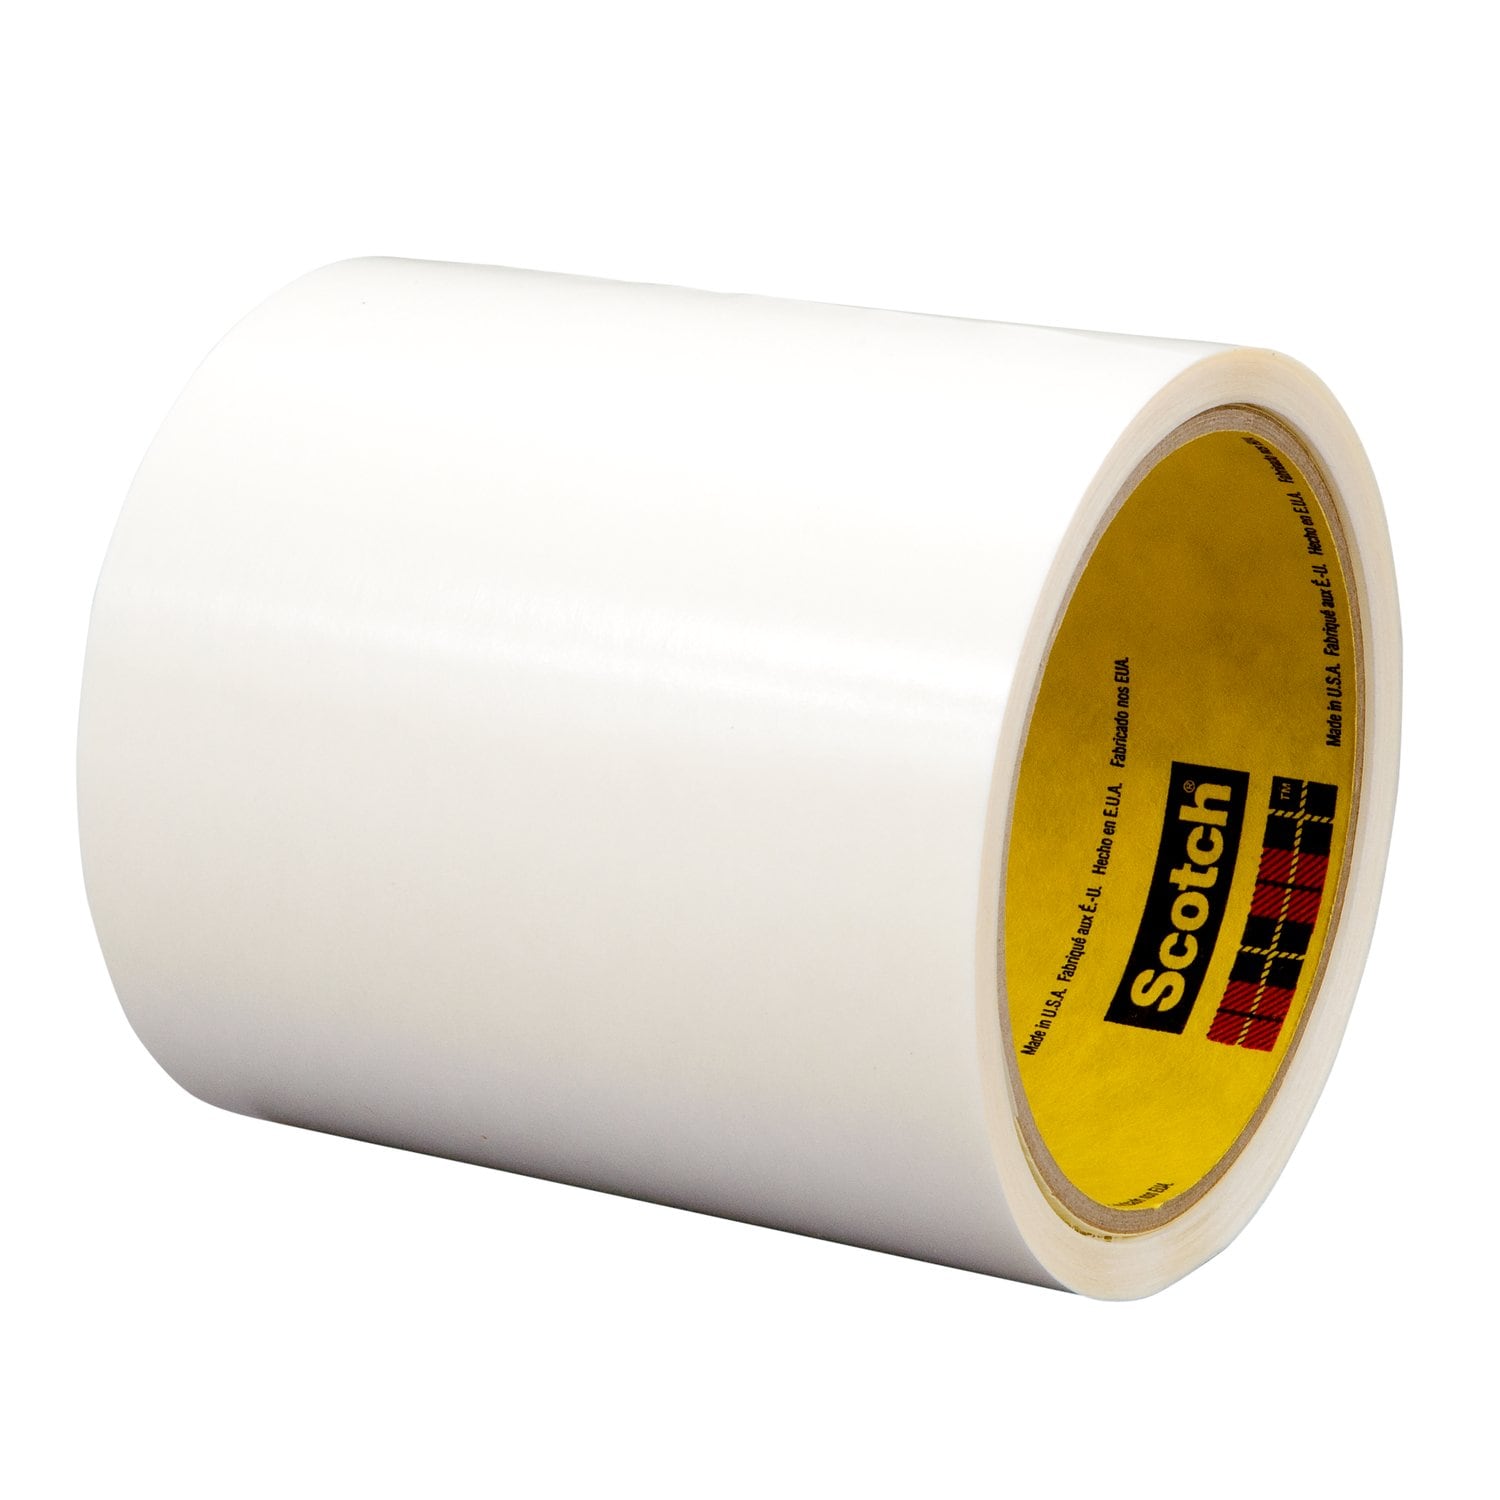 7010374033 - 3M Double Coated Tape 9828, Clear, 54 in x 250 yd, 4 mil, 1 roll per
case